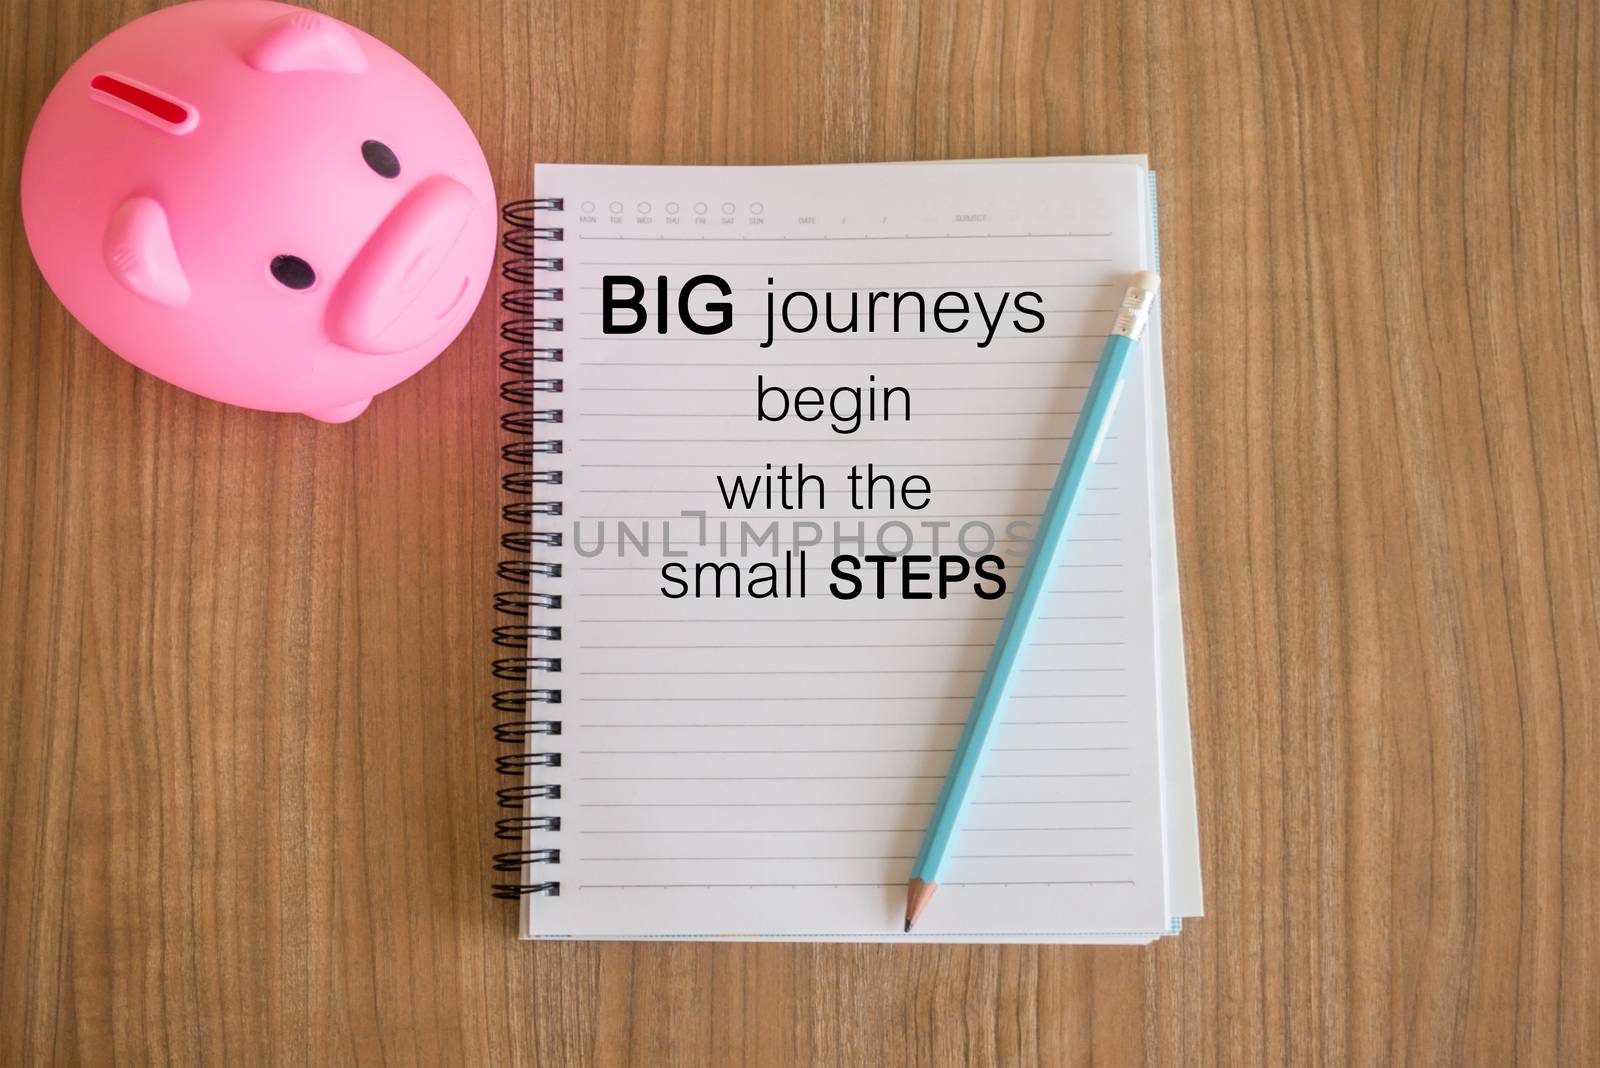 Word  Big journeys begin with the small steps.Inspirational motivational quote on paper and a piggy bank on the wooden table background